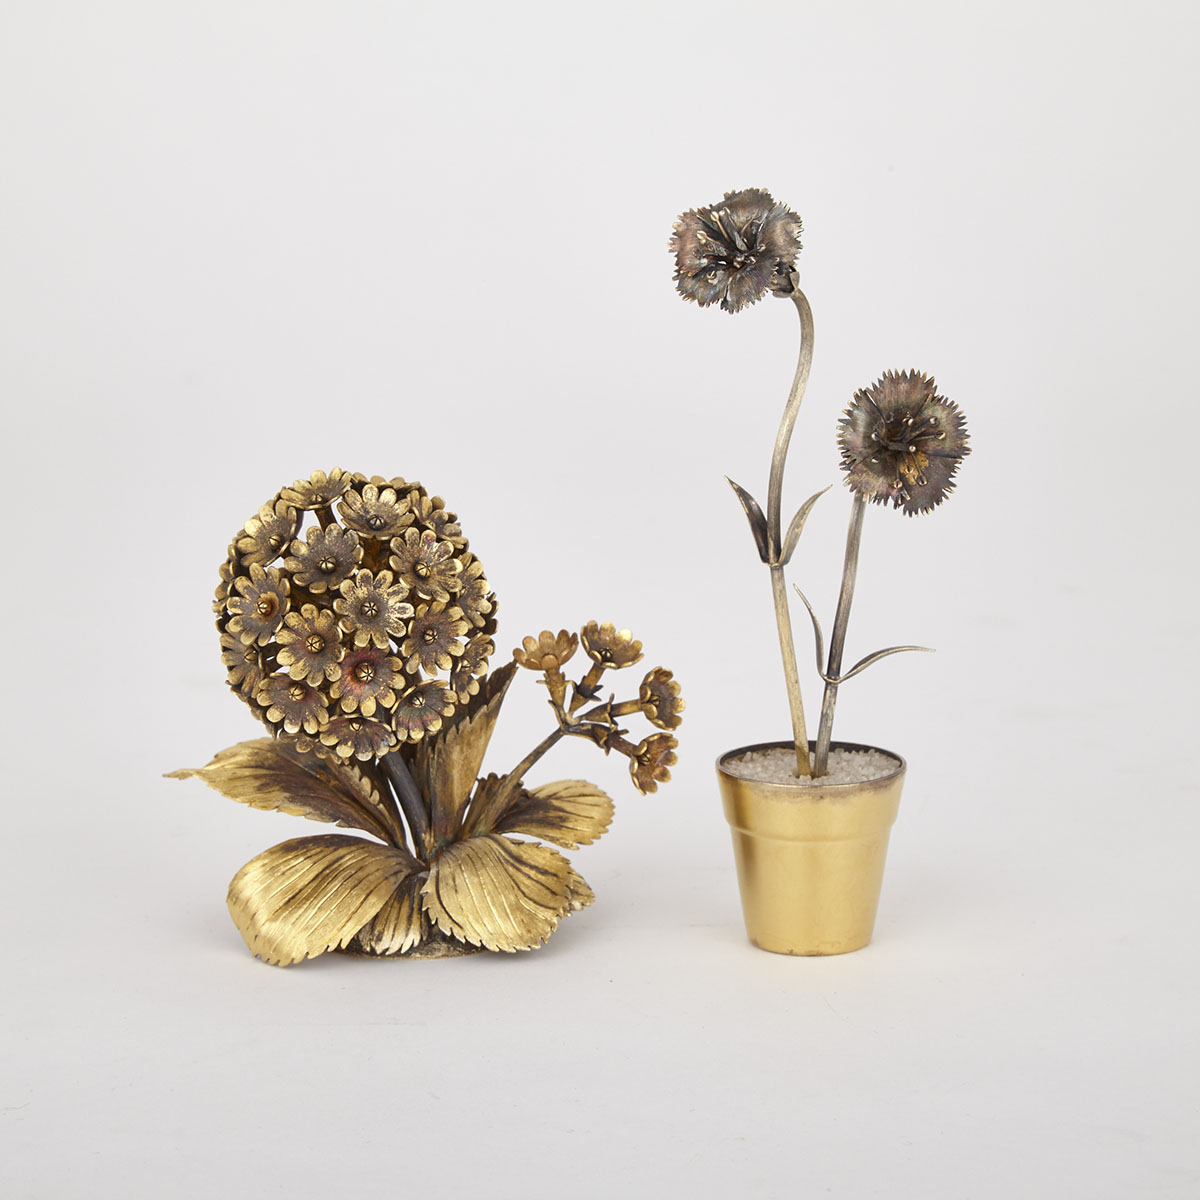 Two Mexican Silver-Gilt Floral Table Ornaments, for Tiffany & Co., New York, N.Y., 20th century